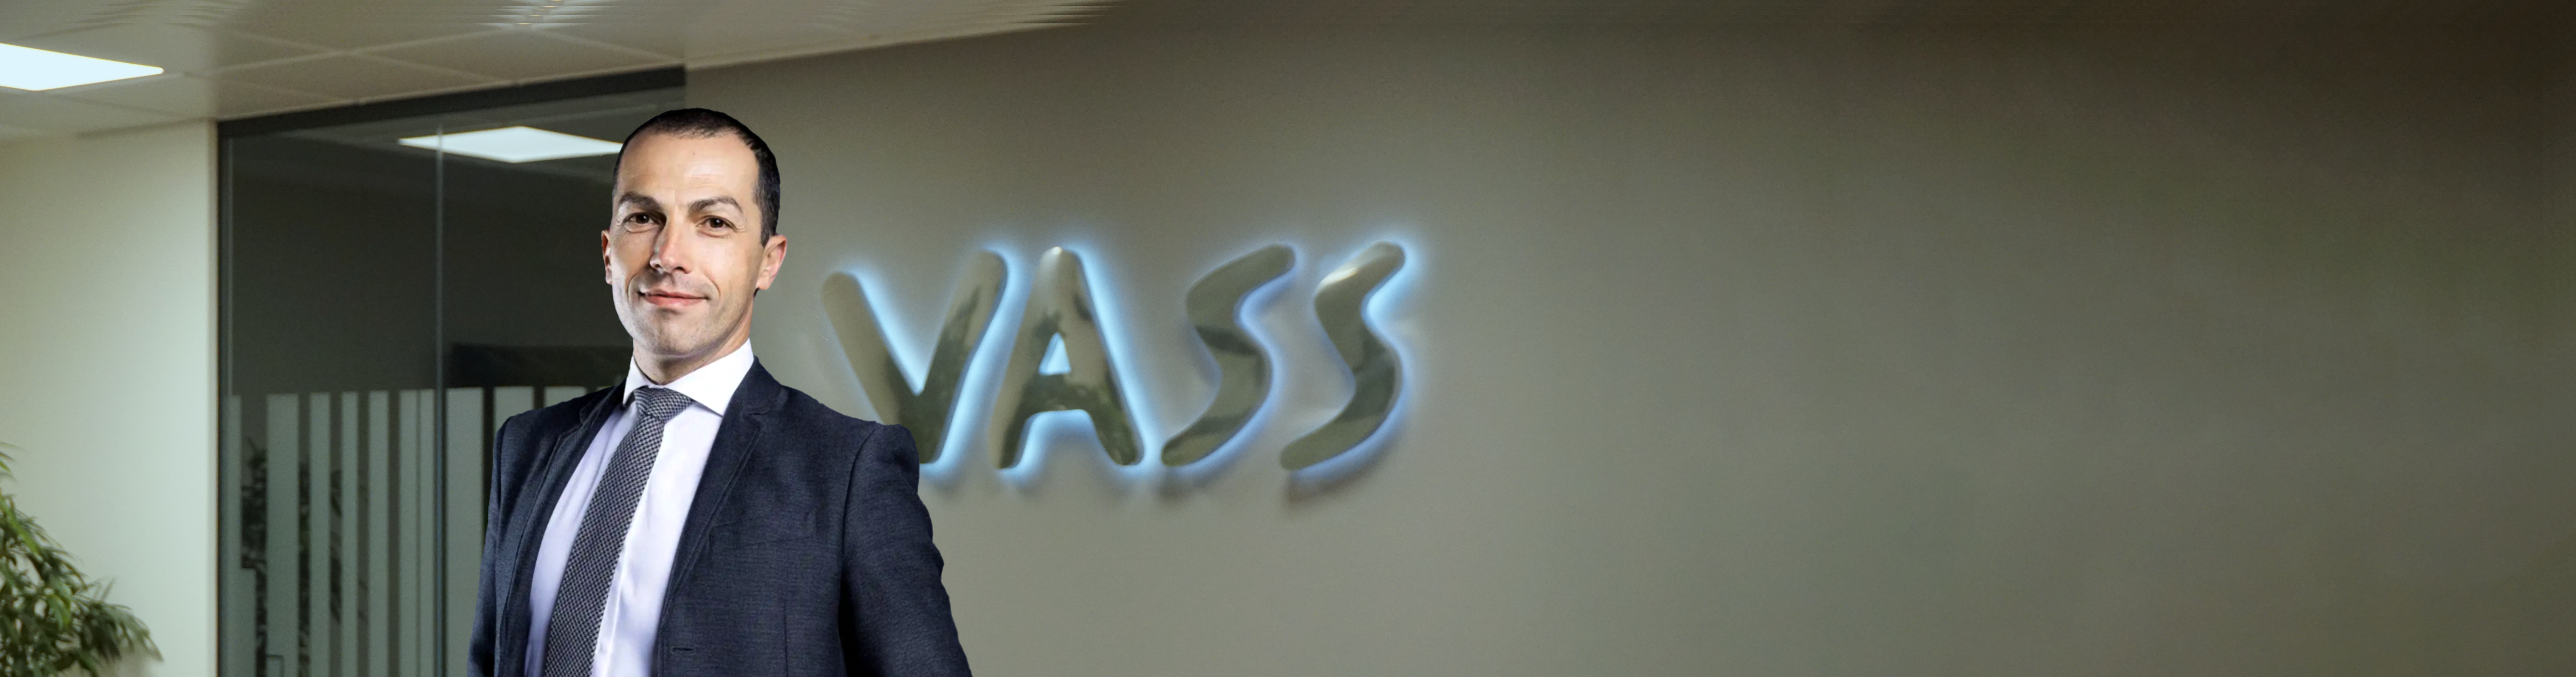 VASS strengthens its presence in Benelux and Greece with the appointment of Domenico Vaccaro as Managing Director